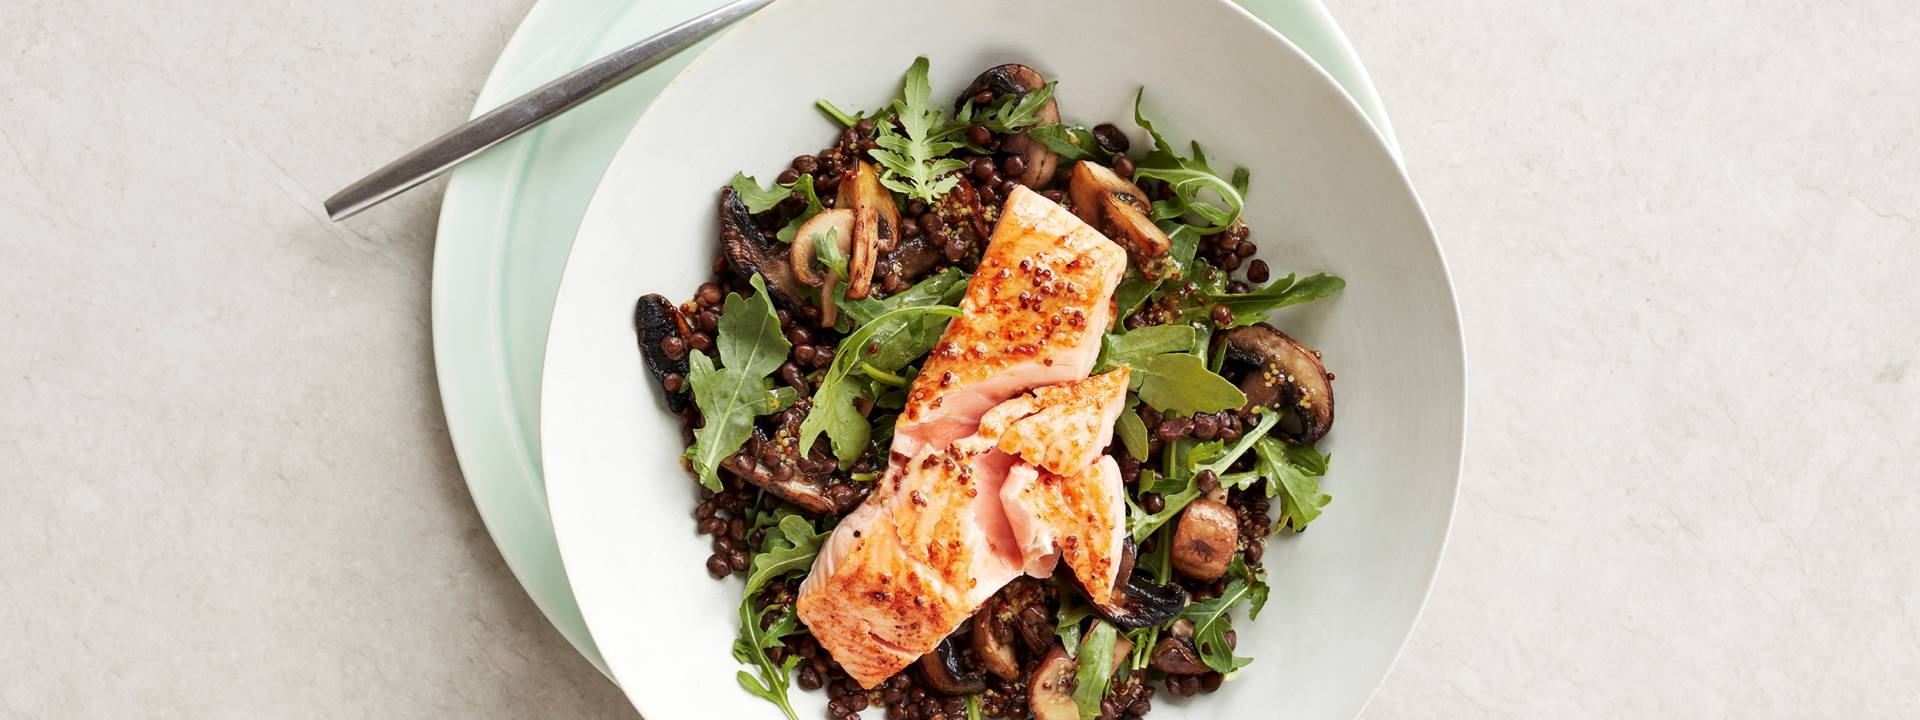 GRILLED SALMON WITH GARLIC MUSHROOM AND LENTIL SALAD 2500px